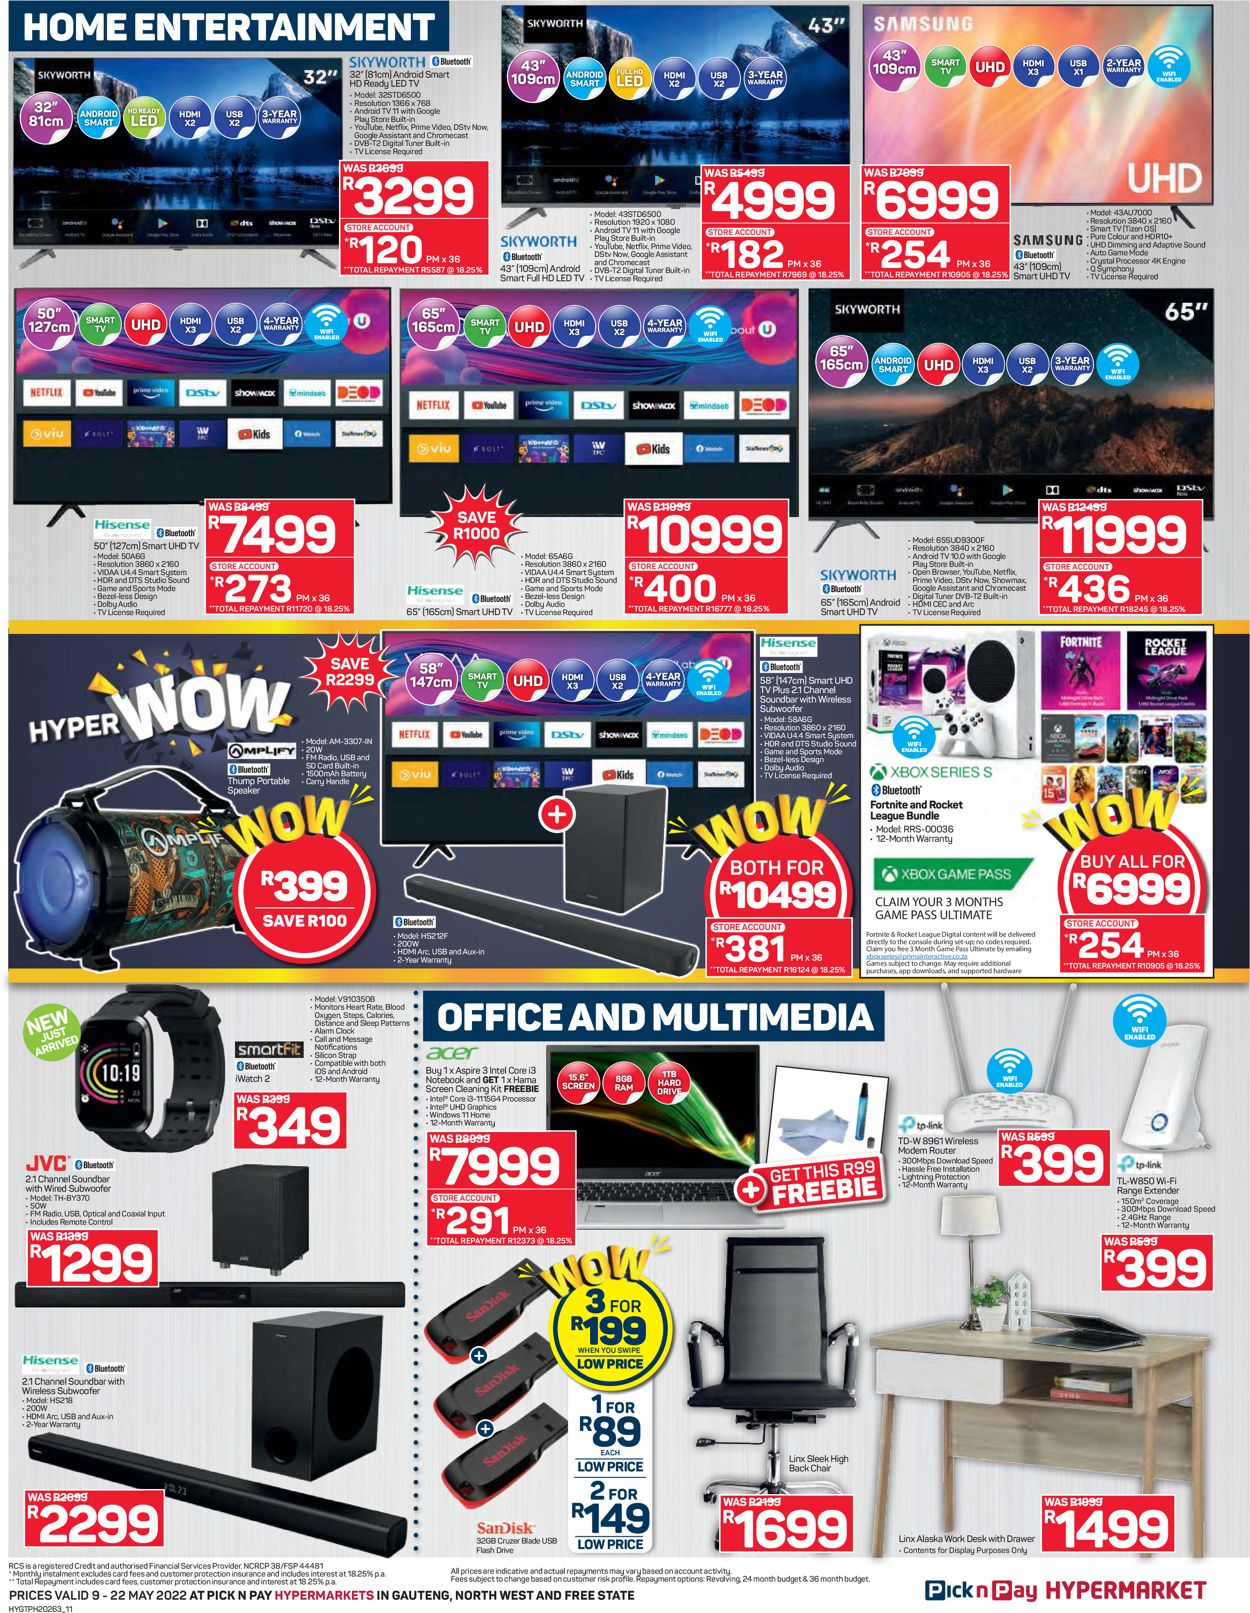 Pick n Pay Catalogue - 2022/05/09-2022/05/22 (Page 11)